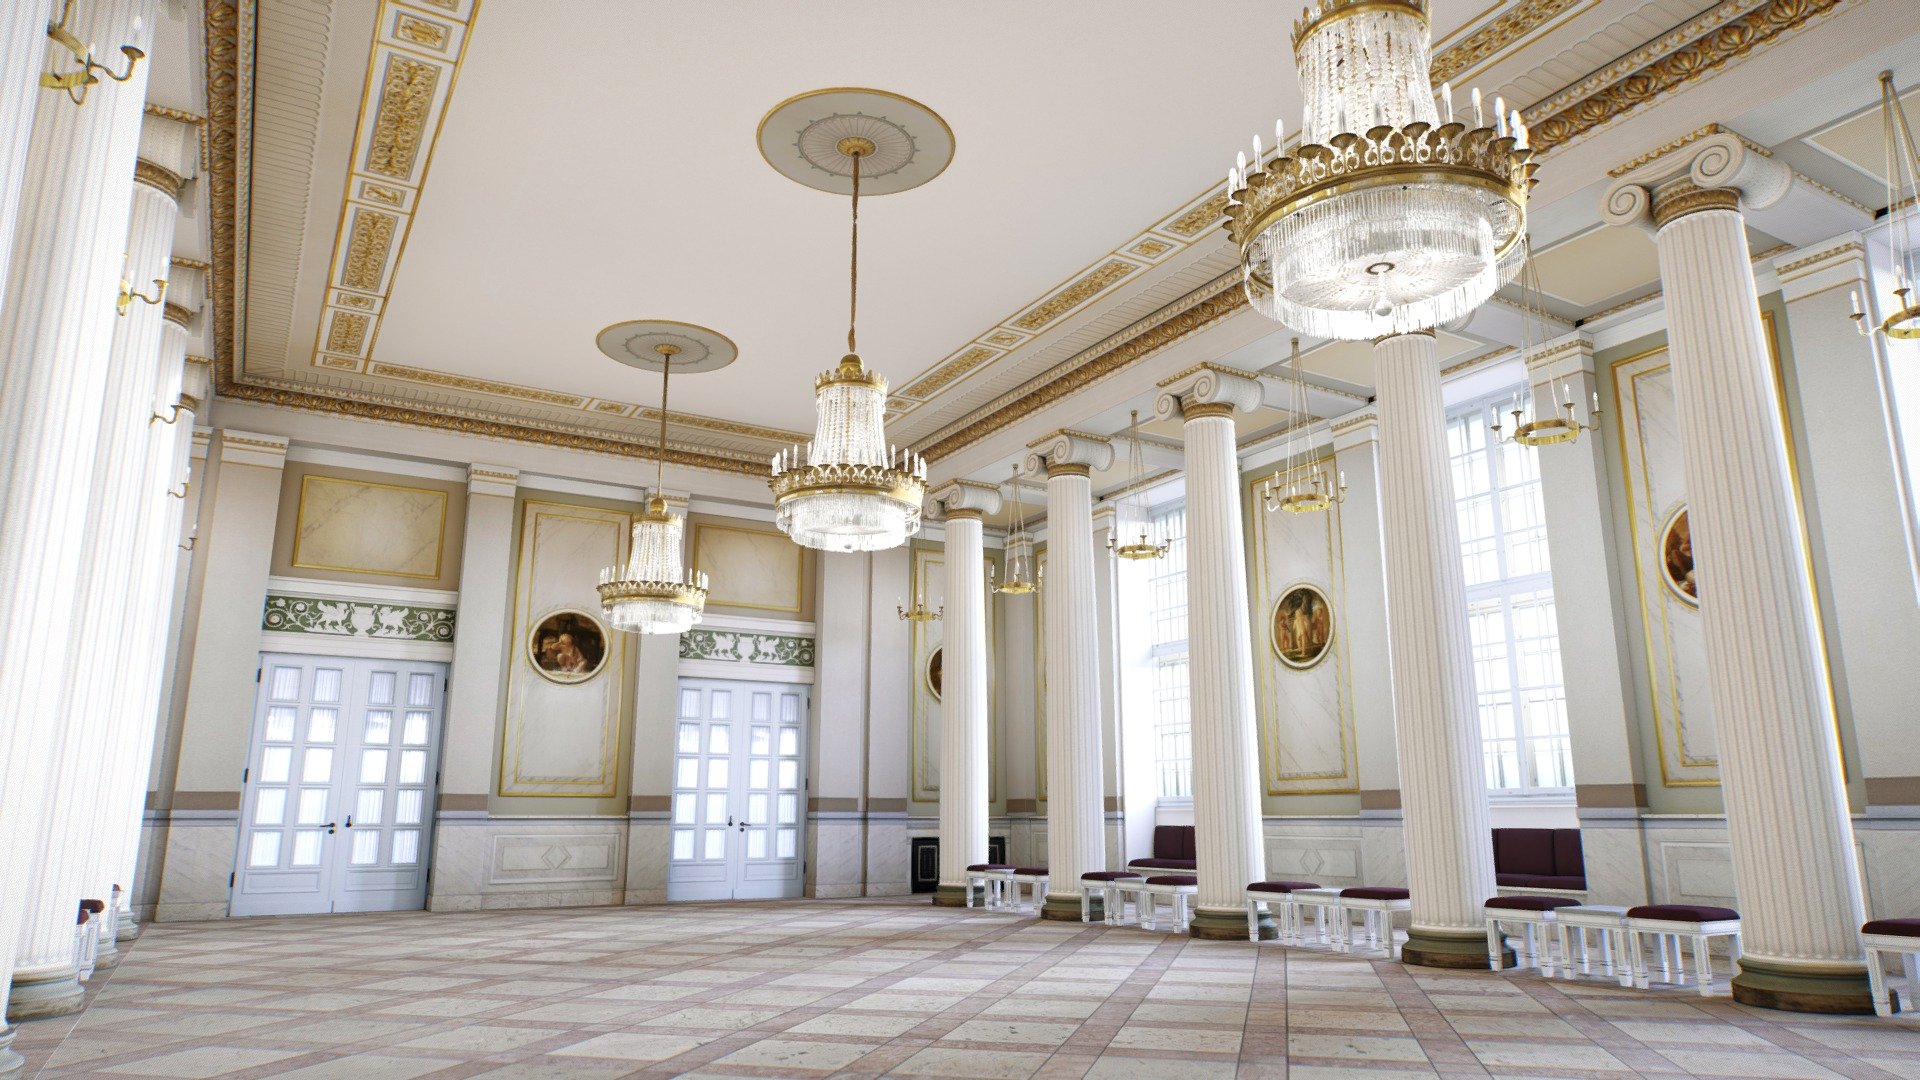 This model was created for our Augmented Reality App &ldquo;Konzerthaus Plus